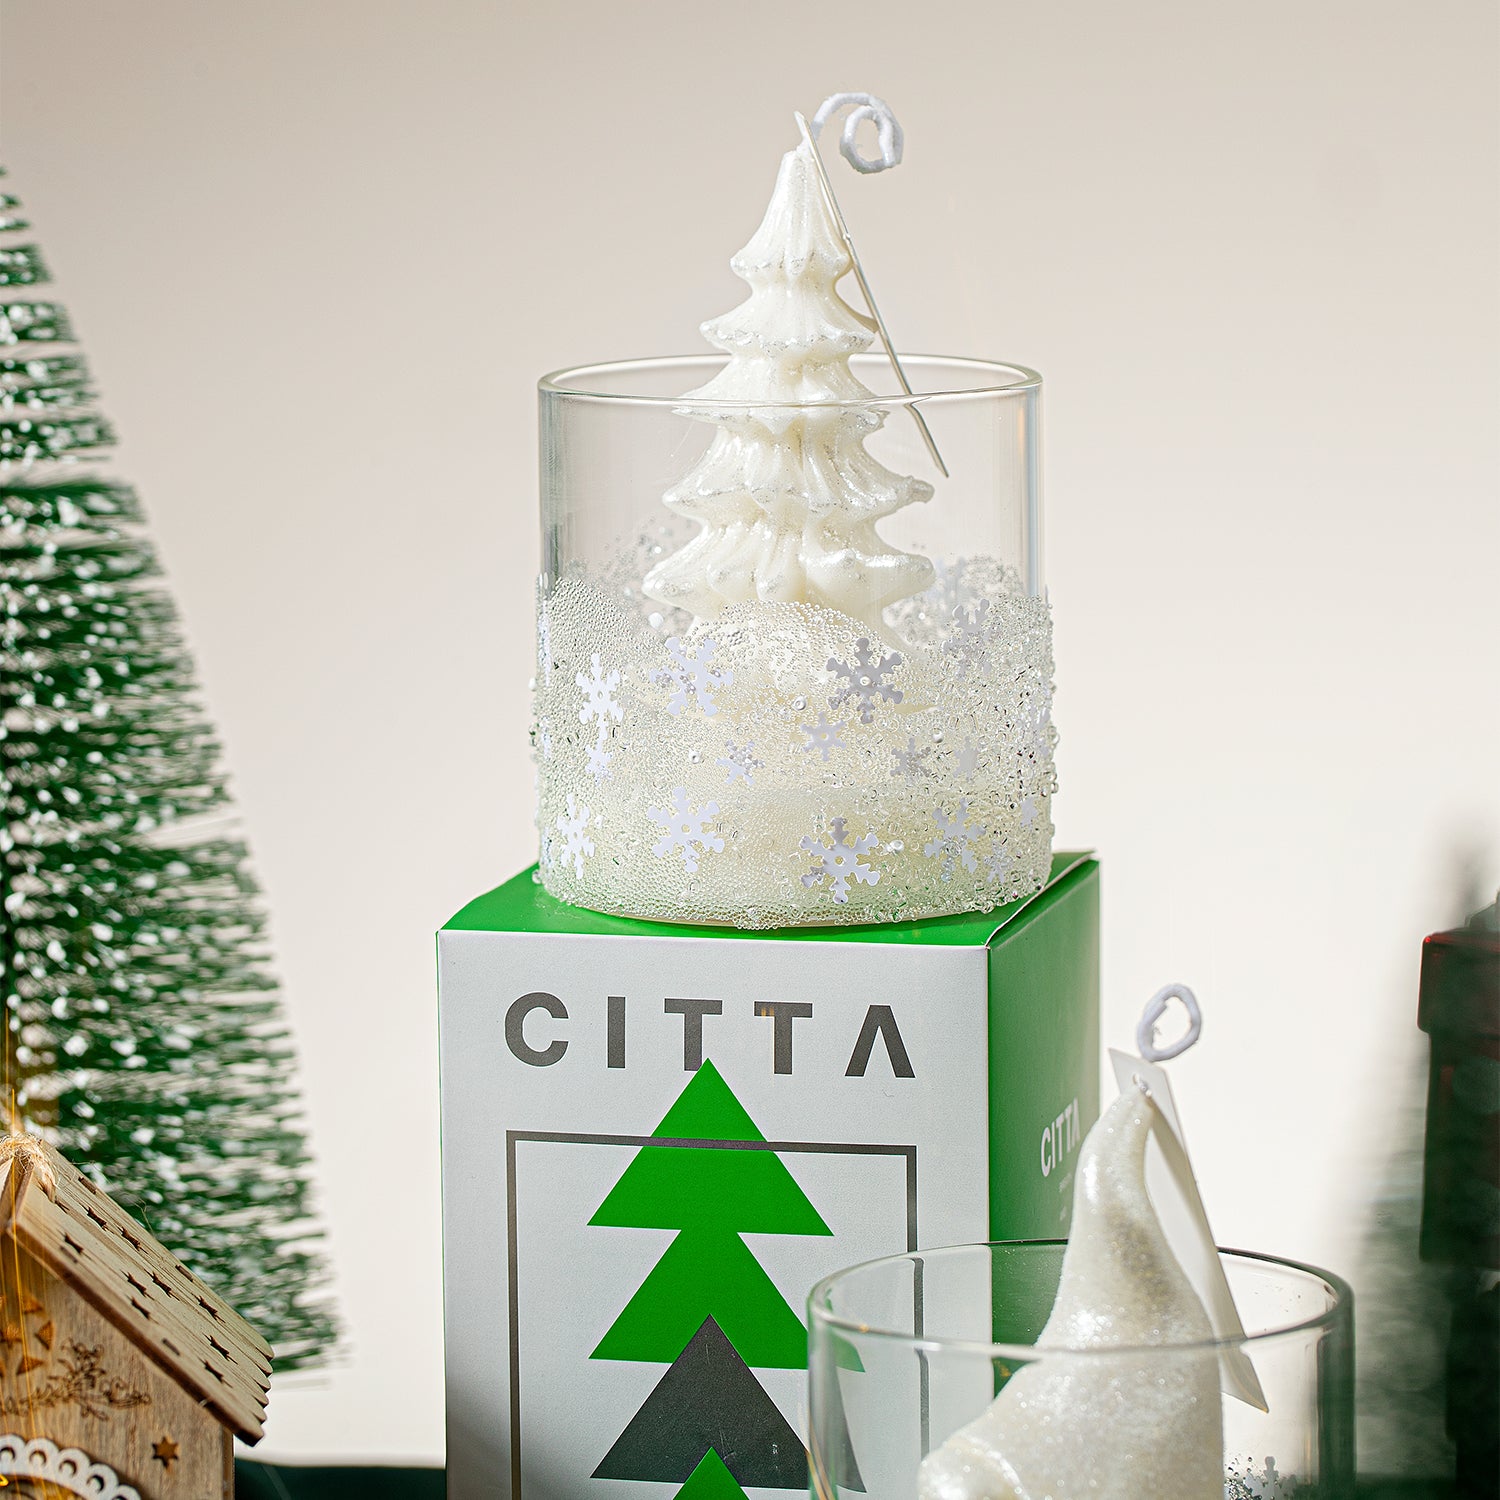 CITTA Snow Velvet Christmas Tree 320G Scented Candle Home Fragrance Aromatherapy Christmas Gift Door Gift, Christmas Tree